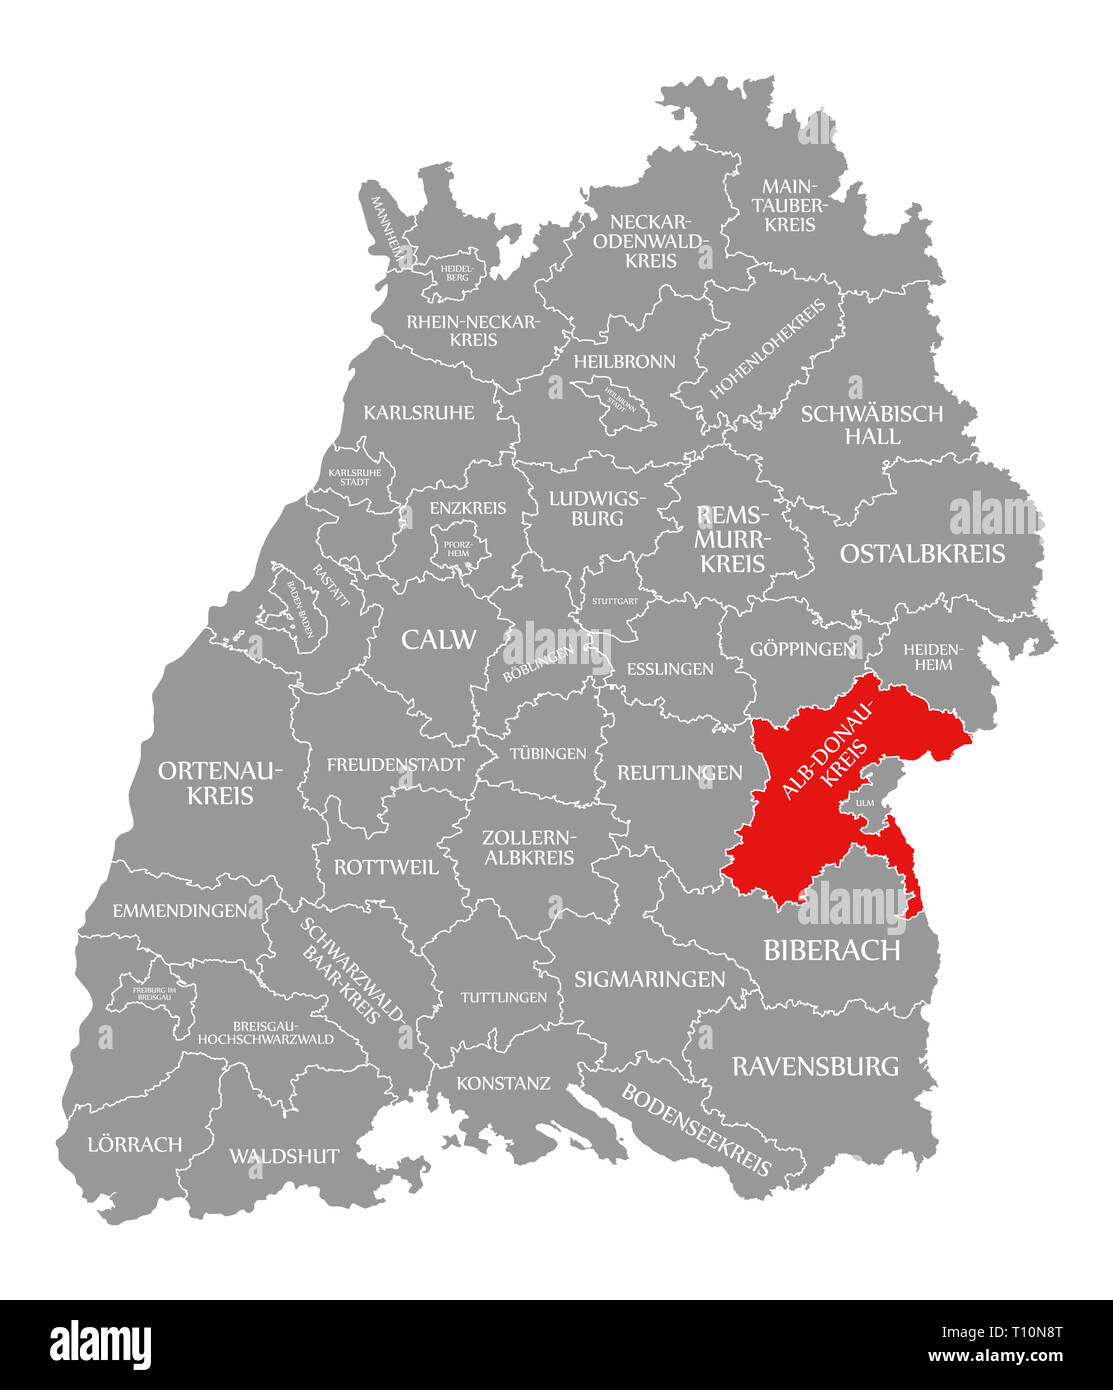 Alb-Donau-Kreis county red highlighted in map of Baden Wuerttemberg Germany Stock Photo